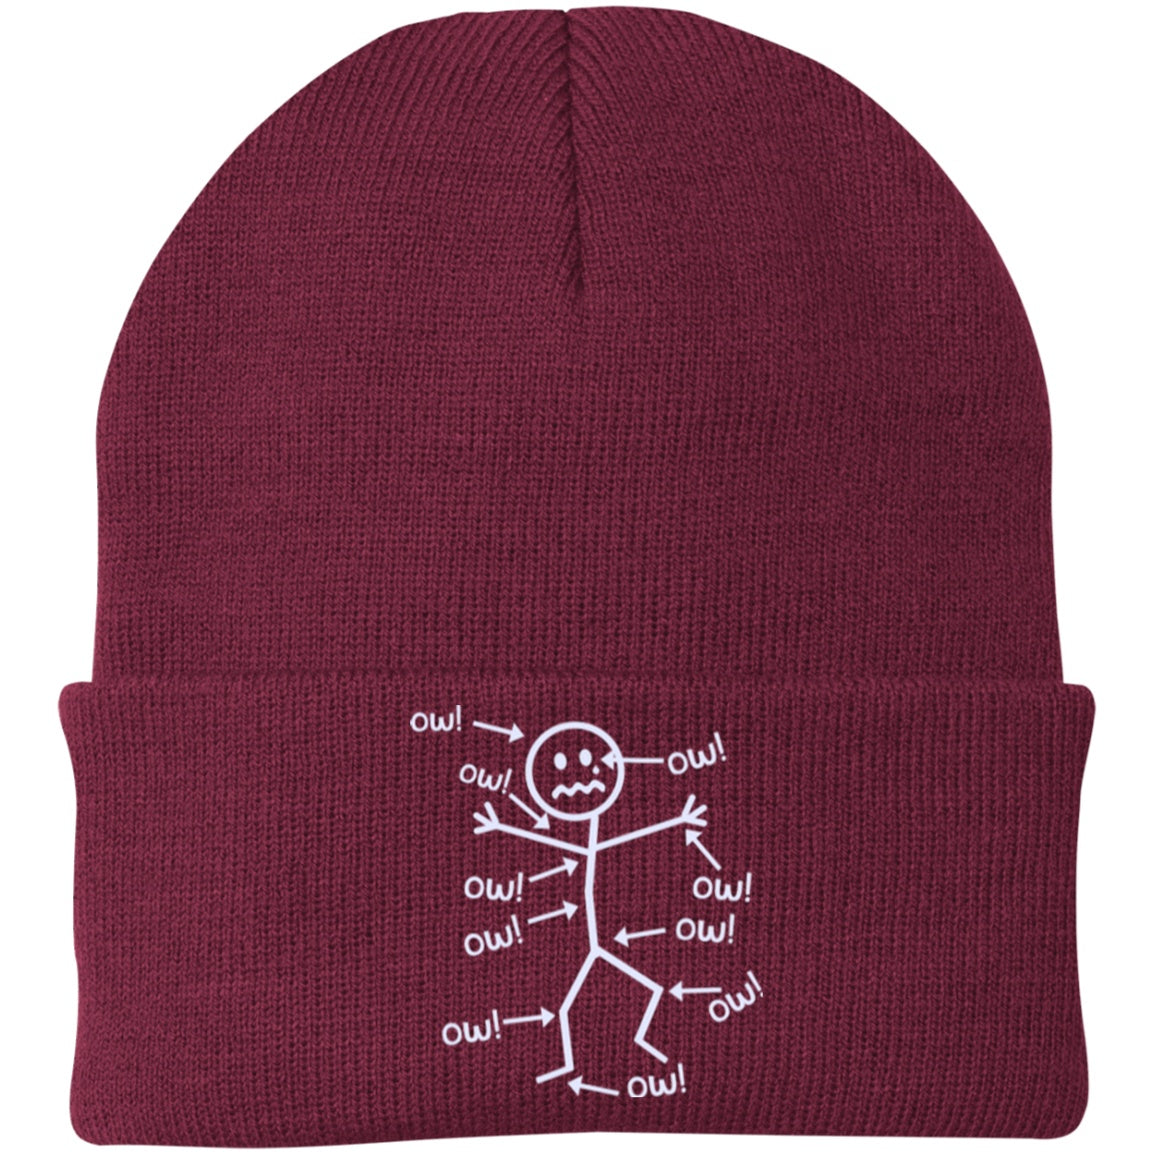 Ow Ow Ow Knit Cap - The Unchargeables